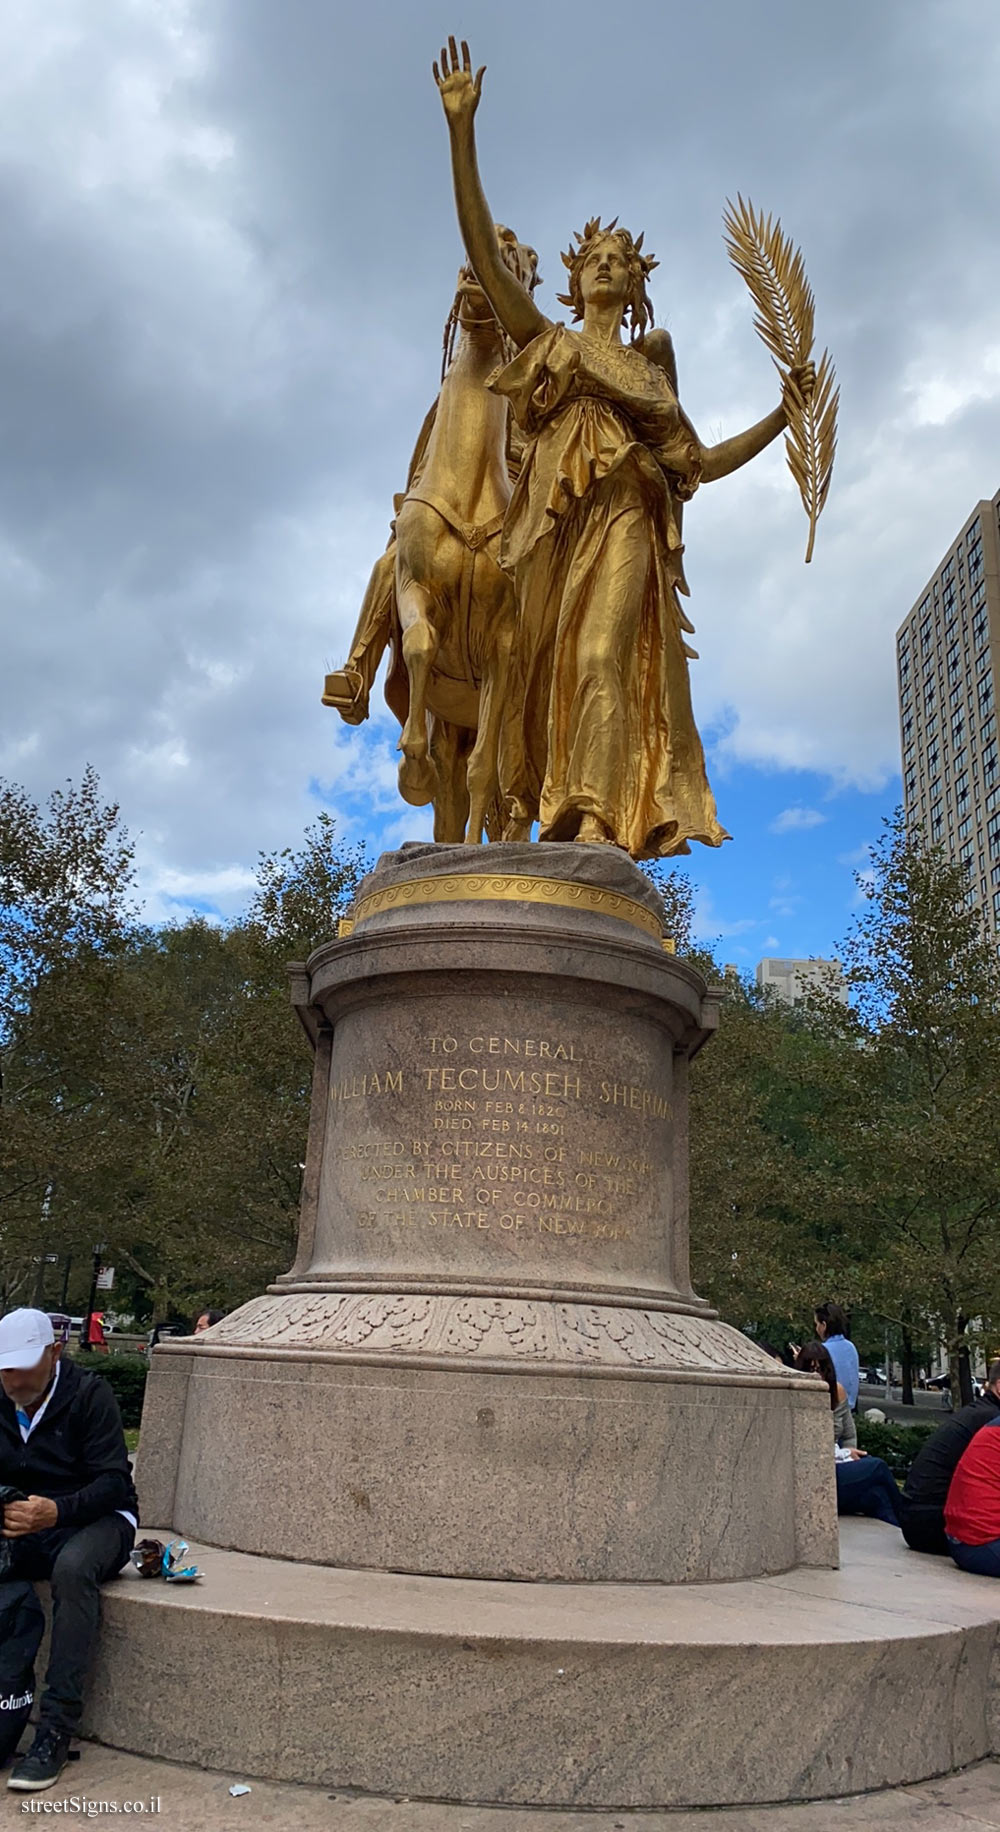 New York - Central Park - A statue in memory of General William Sherman - Grand Army Plaza, New York, NY 10019, USA